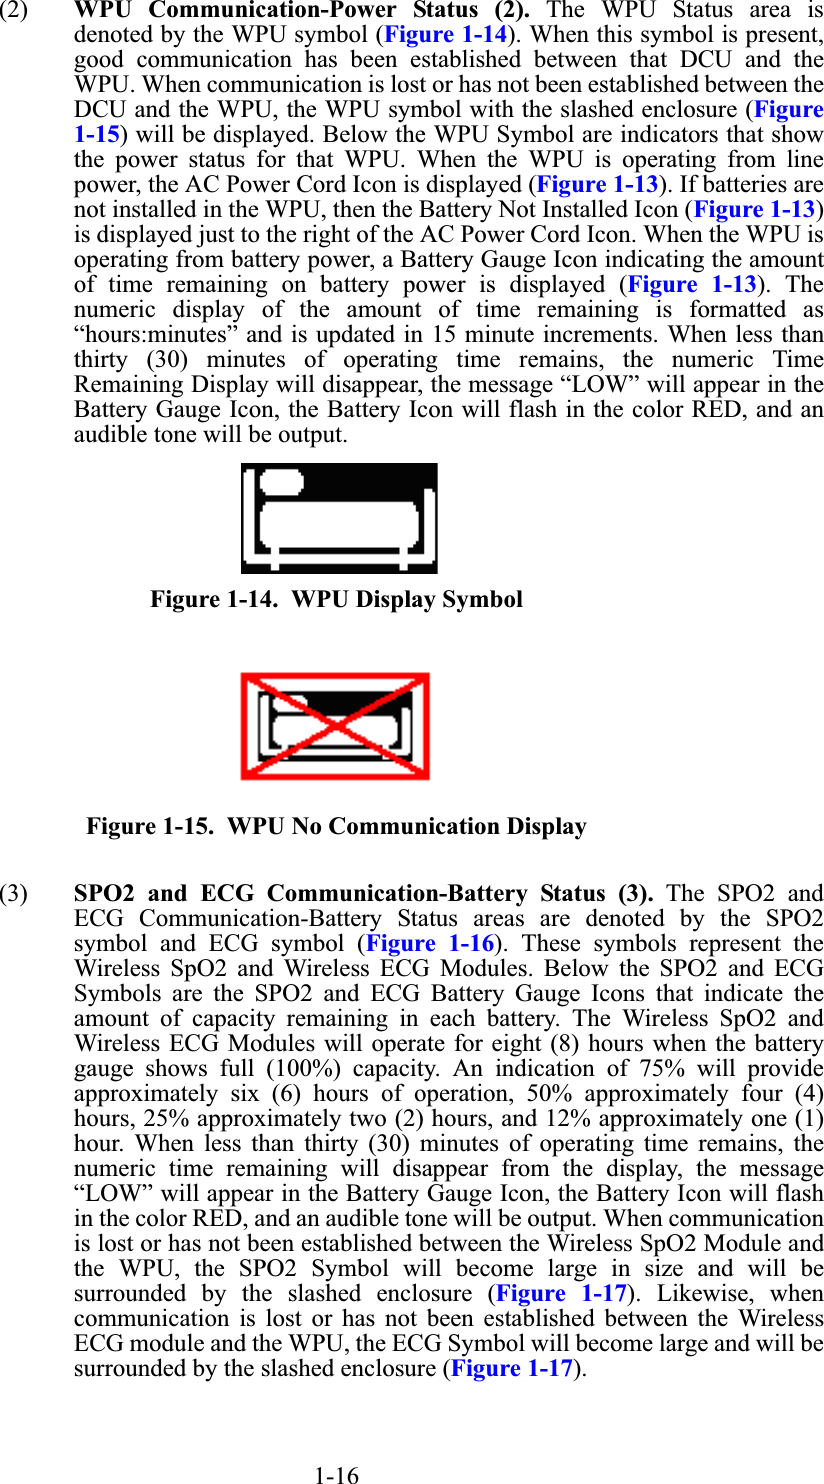 1-16(2) WPU Communication-Power Status (2). The WPU Status area isdenoted by the WPU symbol (Figure 1-14). When this symbol is present,good communication has been established between that DCU and theWPU. When communication is lost or has not been established between theDCU and the WPU, the WPU symbol with the slashed enclosure (Figure1-15) will be displayed. Below the WPU Symbol are indicators that showthe power status for that WPU. When the WPU is operating from linepower, the AC Power Cord Icon is displayed (Figure 1-13). If batteries arenot installed in the WPU, then the Battery Not Installed Icon (Figure 1-13)is displayed just to the right of the AC Power Cord Icon. When the WPU isoperating from battery power, a Battery Gauge Icon indicating the amountof time remaining on battery power is displayed (Figure 1-13). Thenumeric display of the amount of time remaining is formatted as“hours:minutes” and is updated in 15 minute increments. When less thanthirty (30) minutes of operating time remains, the numeric TimeRemaining Display will disappear, the message “LOW” will appear in theBattery Gauge Icon, the Battery Icon will flash in the color RED, and anaudible tone will be output.Figure 1-14.  WPU Display SymbolFigure 1-15.  WPU No Communication Display(3) SPO2 and ECG Communication-Battery Status (3). The SPO2 andECG Communication-Battery Status areas are denoted by the SPO2symbol and ECG symbol (Figure 1-16). These symbols represent theWireless SpO2 and Wireless ECG Modules. Below the SPO2 and ECGSymbols are the SPO2 and ECG Battery Gauge Icons that indicate theamount of capacity remaining in each battery. The Wireless SpO2 andWireless ECG Modules will operate for eight (8) hours when the batterygauge shows full (100%) capacity. An indication of 75% will provideapproximately six (6) hours of operation, 50% approximately four (4)hours, 25% approximately two (2) hours, and 12% approximately one (1)hour. When less than thirty (30) minutes of operating time remains, thenumeric time remaining will disappear from the display, the message“LOW” will appear in the Battery Gauge Icon, the Battery Icon will flashin the color RED, and an audible tone will be output. When communicationis lost or has not been established between the Wireless SpO2 Module andthe WPU, the SPO2 Symbol will become large in size and will besurrounded by the slashed enclosure (Figure 1-17). Likewise, whencommunication is lost or has not been established between the WirelessECG module and the WPU, the ECG Symbol will become large and will besurrounded by the slashed enclosure (Figure 1-17).